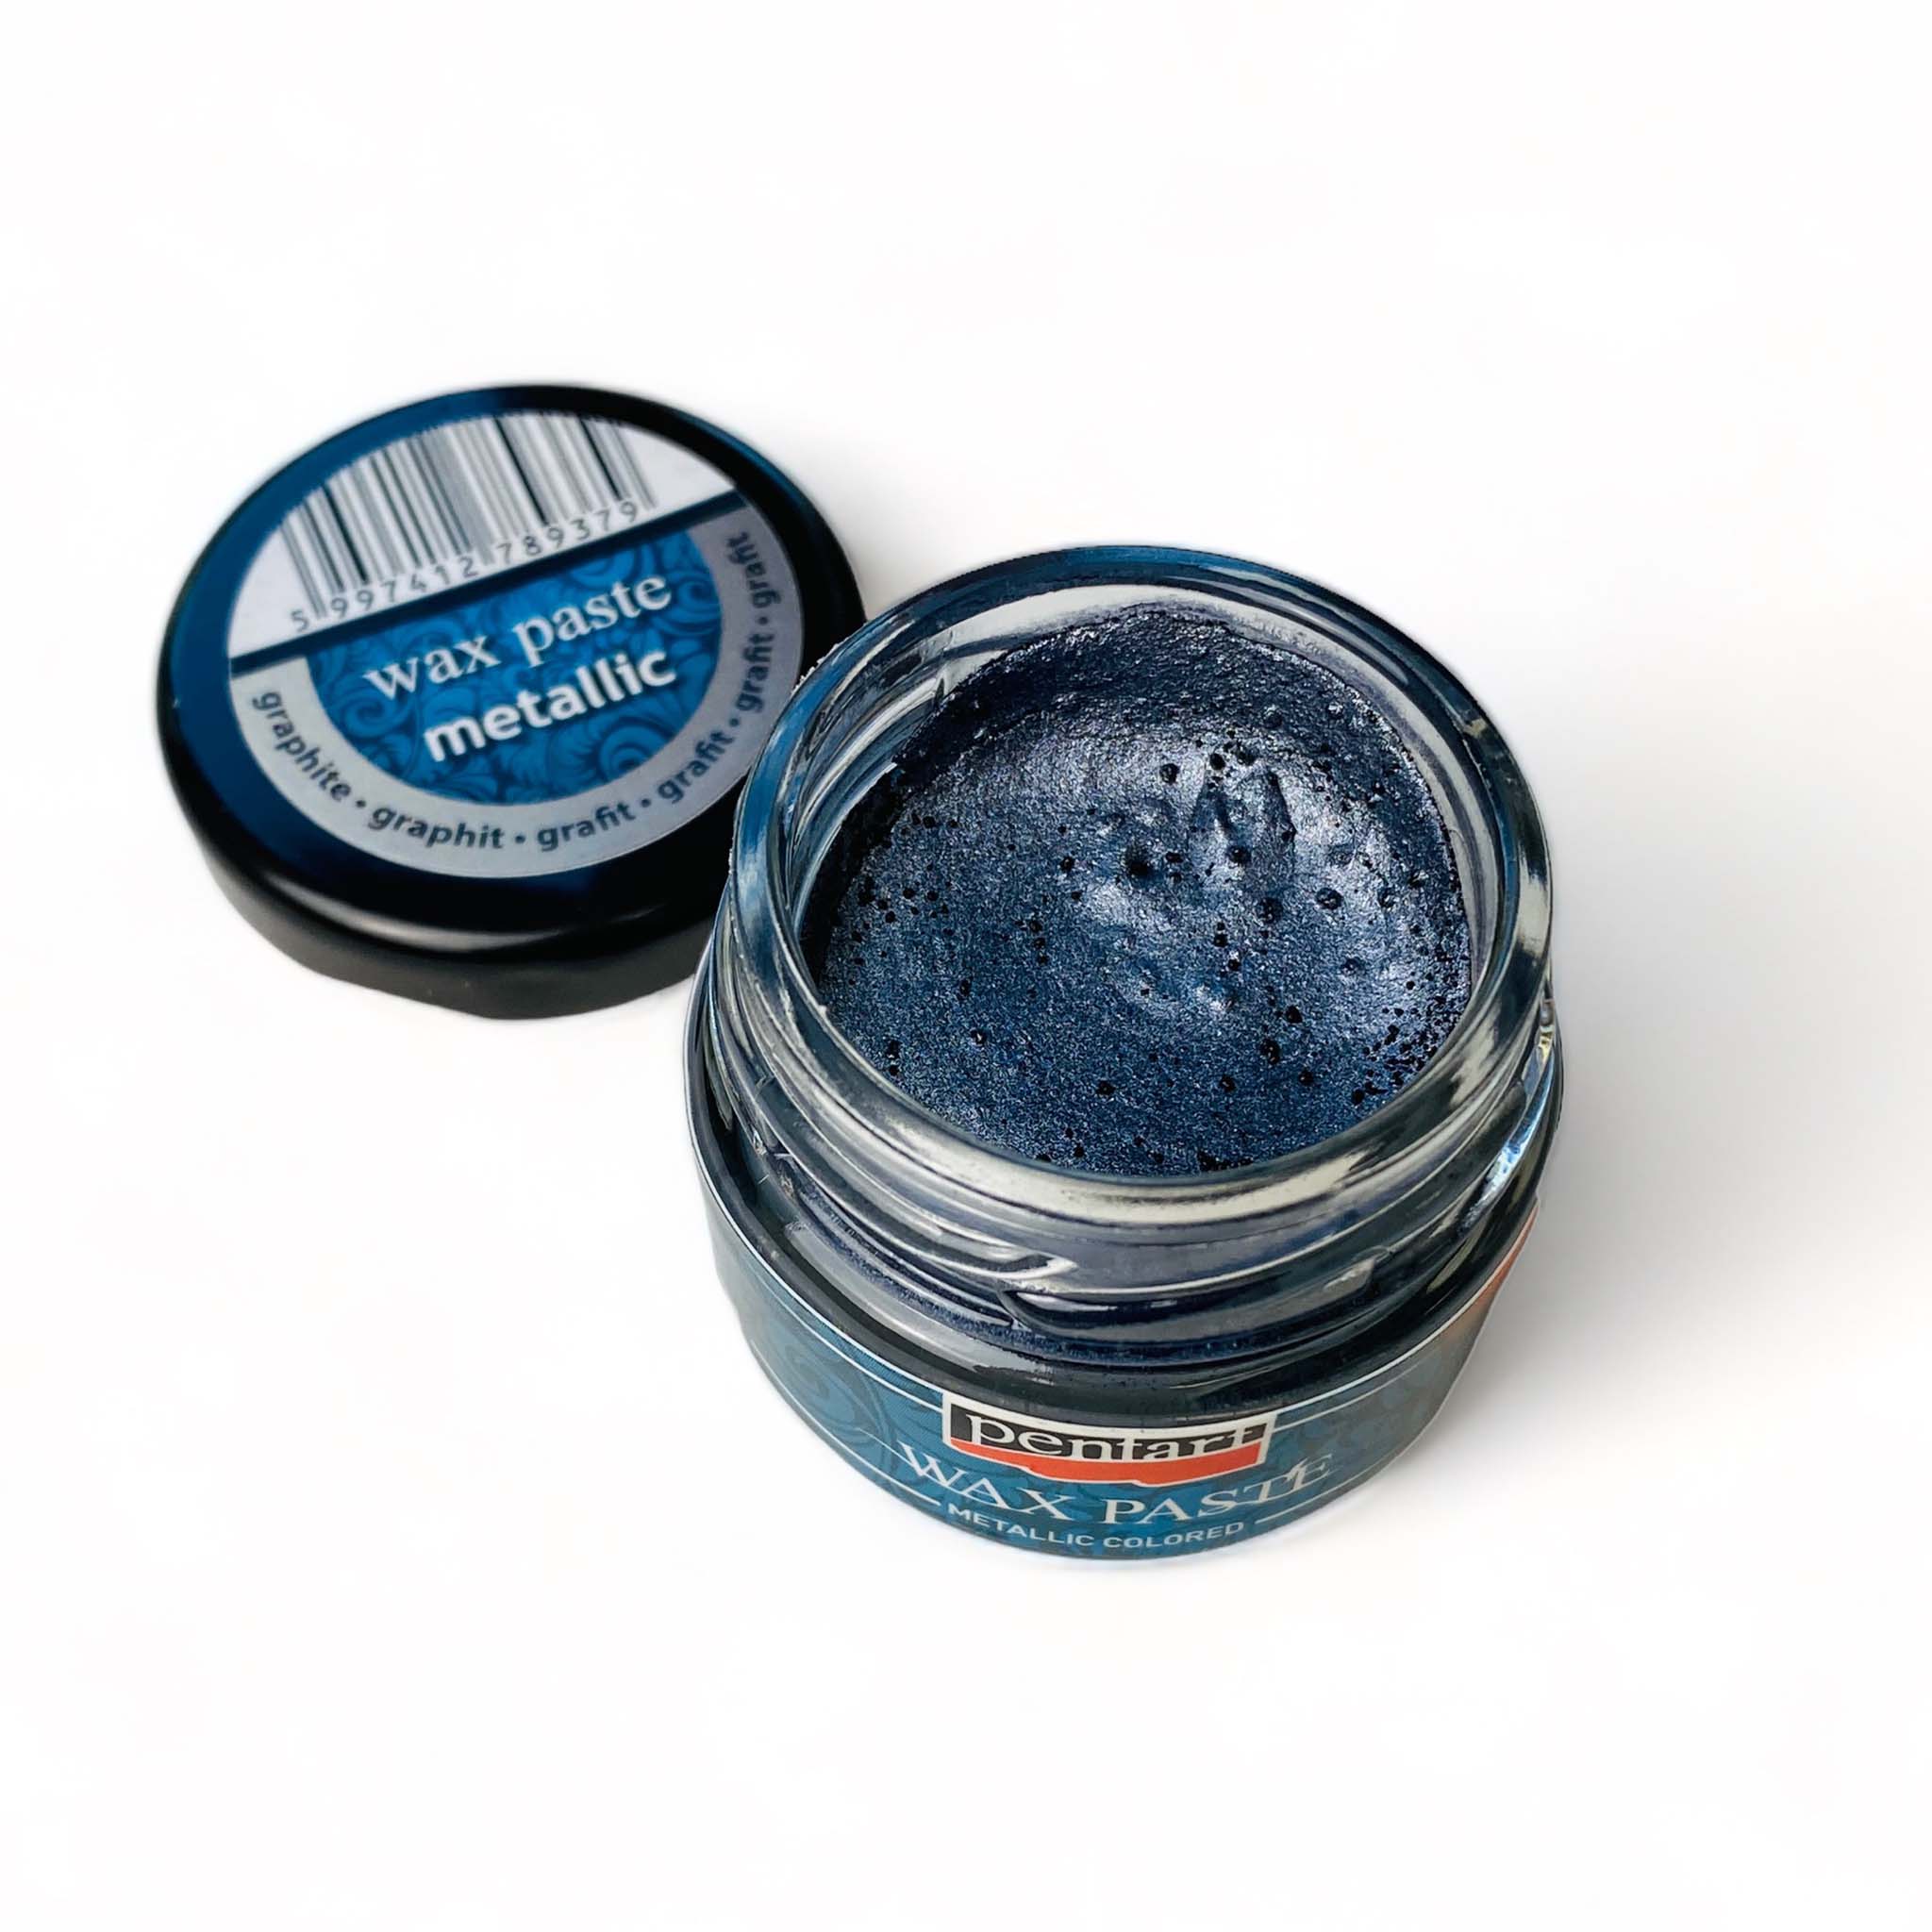 An open jar of a 20ml/0.68 ounce jar of metallic Graphite wax paste by Pentart is against a white background.